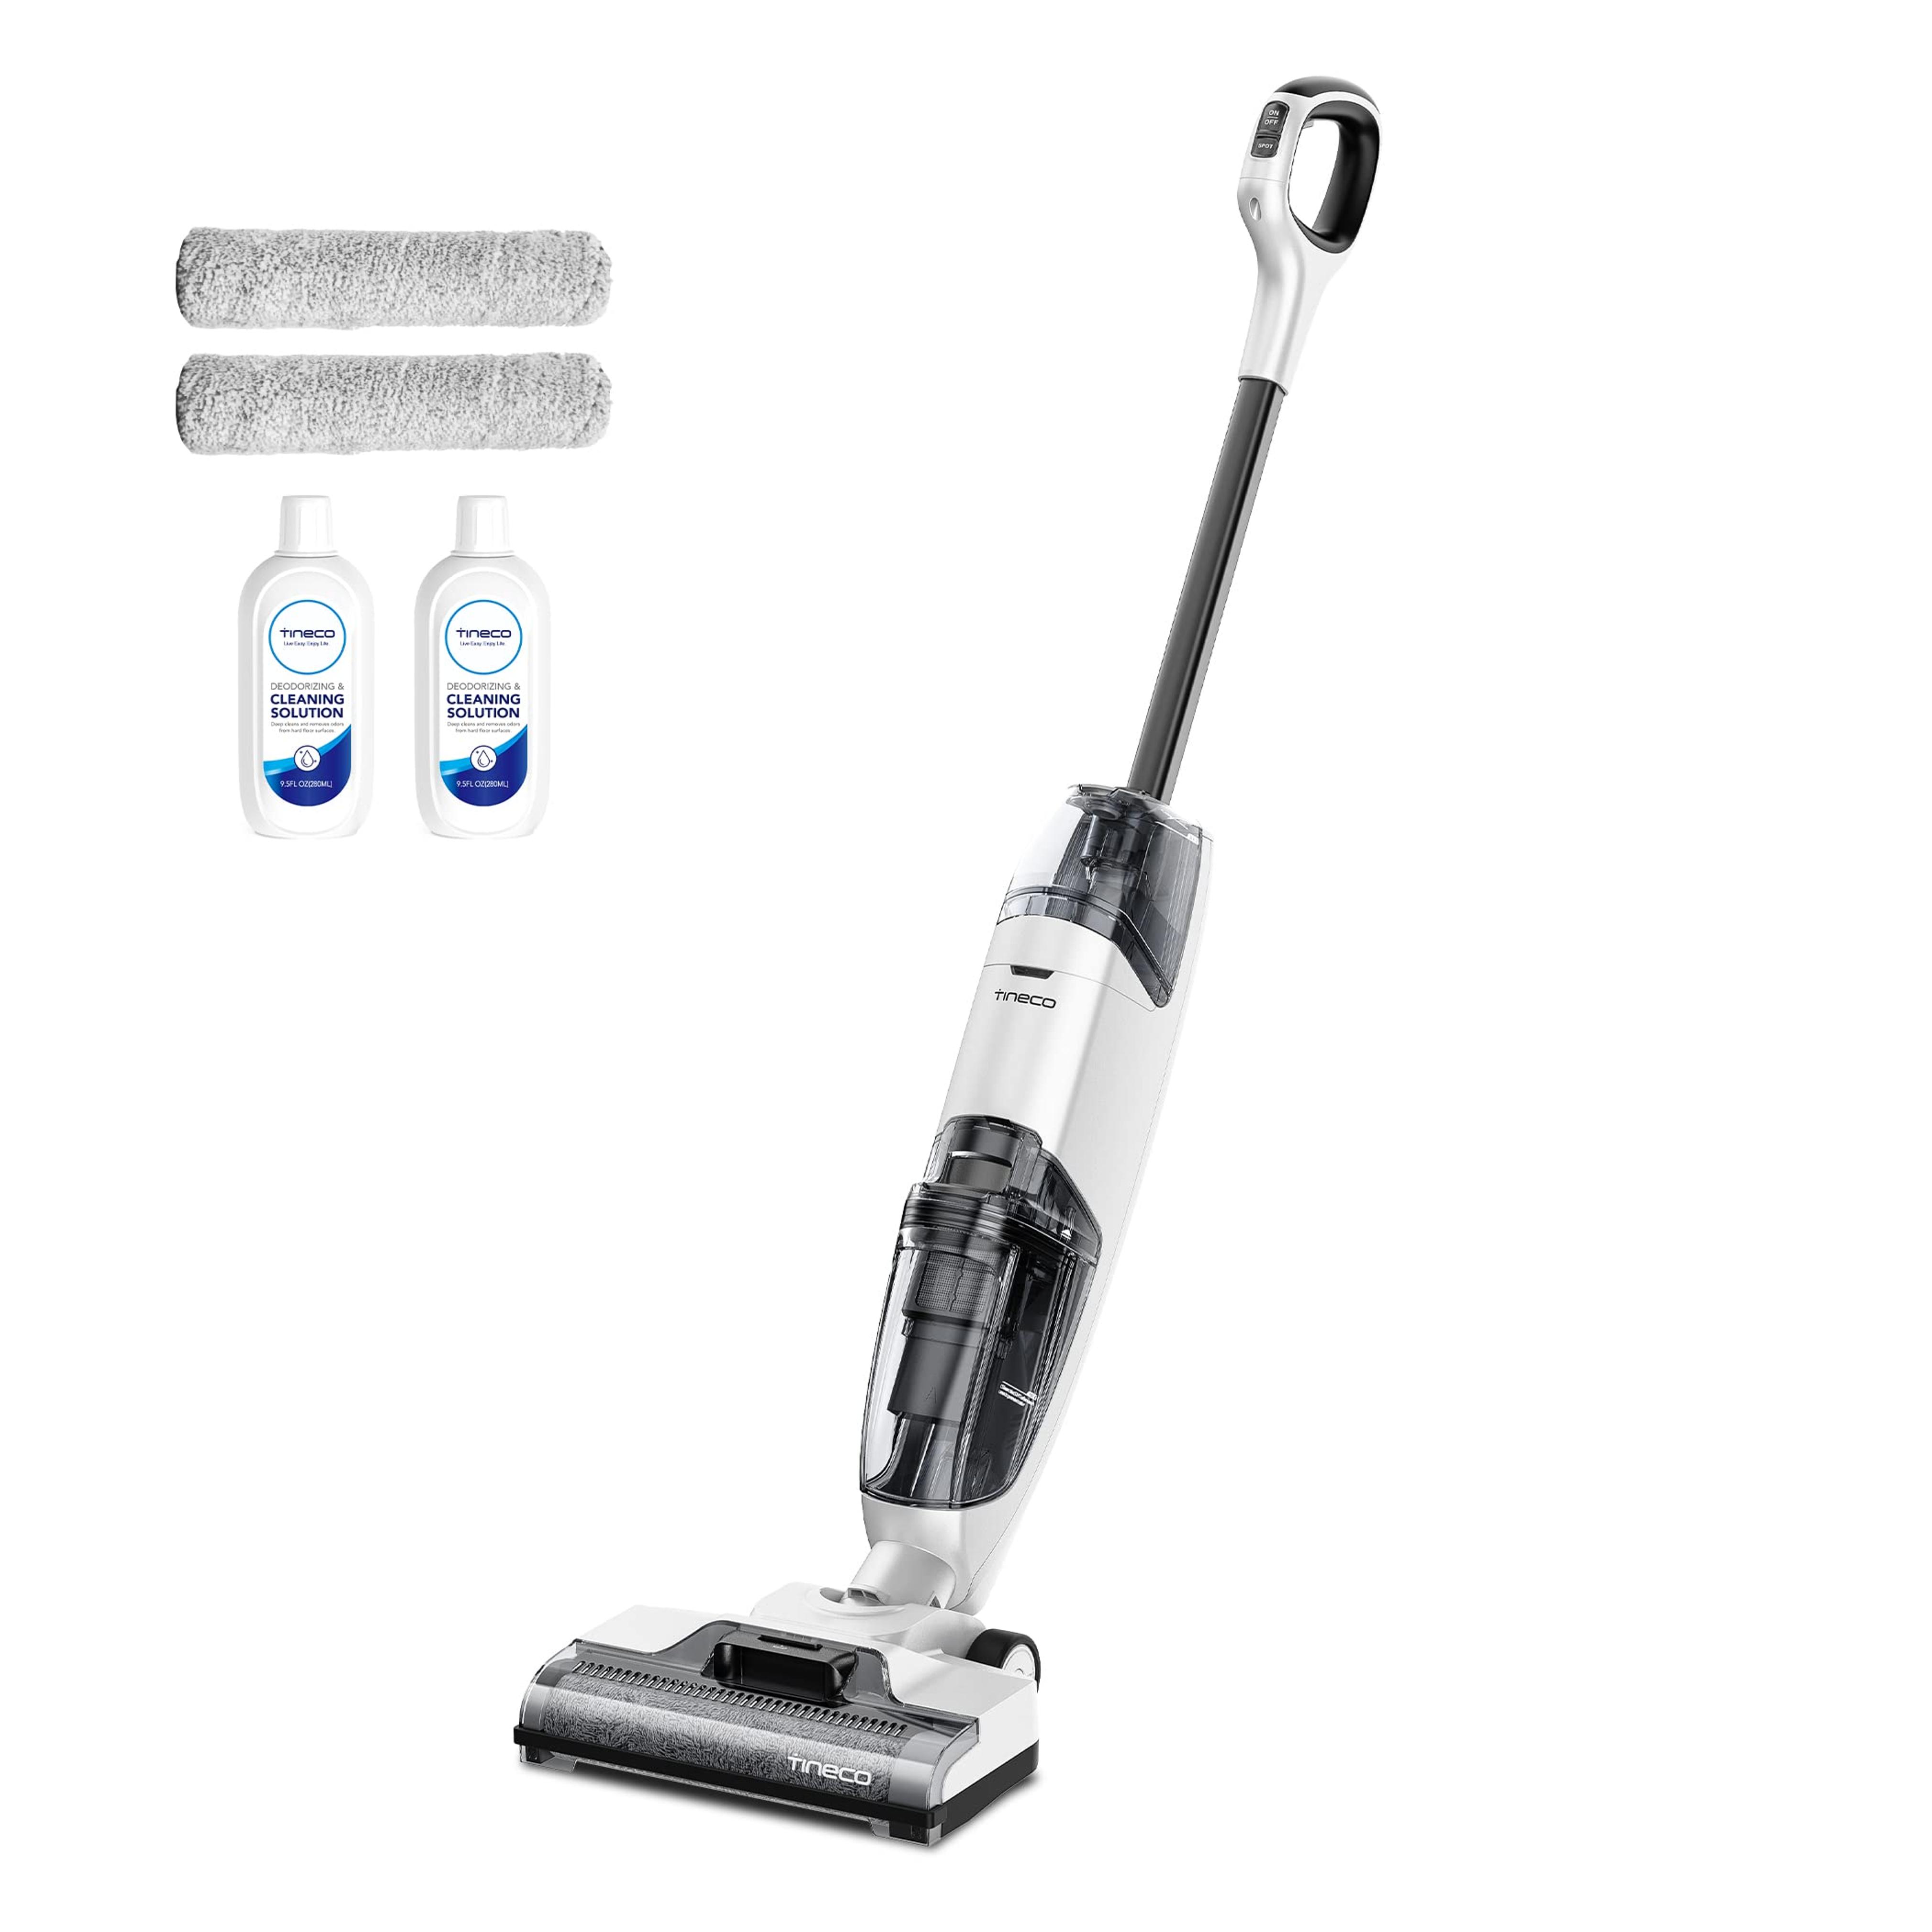 Limited-time deal: Tineco iFLOOR 2 Complete Cordless Wet Dry Vacuum Floor Cleaner and Mop, One-Step Cleaning for Hard Floors, Great for Sticky Messes and Pet Hair